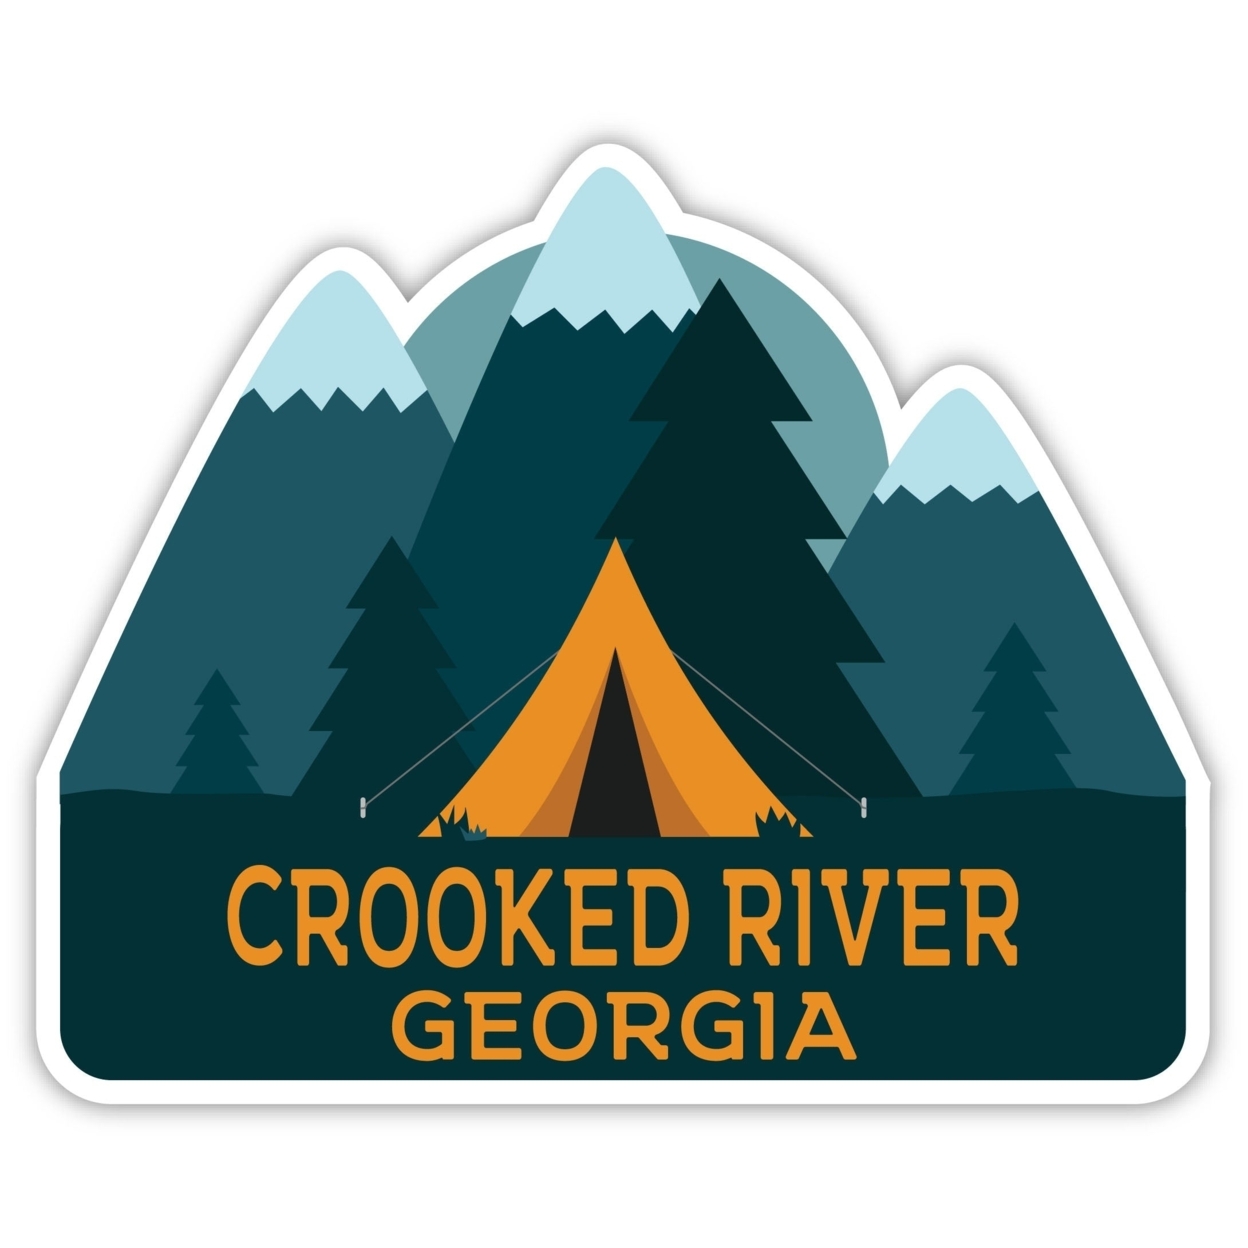 Crooked River Georgia Souvenir Decorative Stickers (Choose Theme And Size) - 4-Pack, 10-Inch, Tent